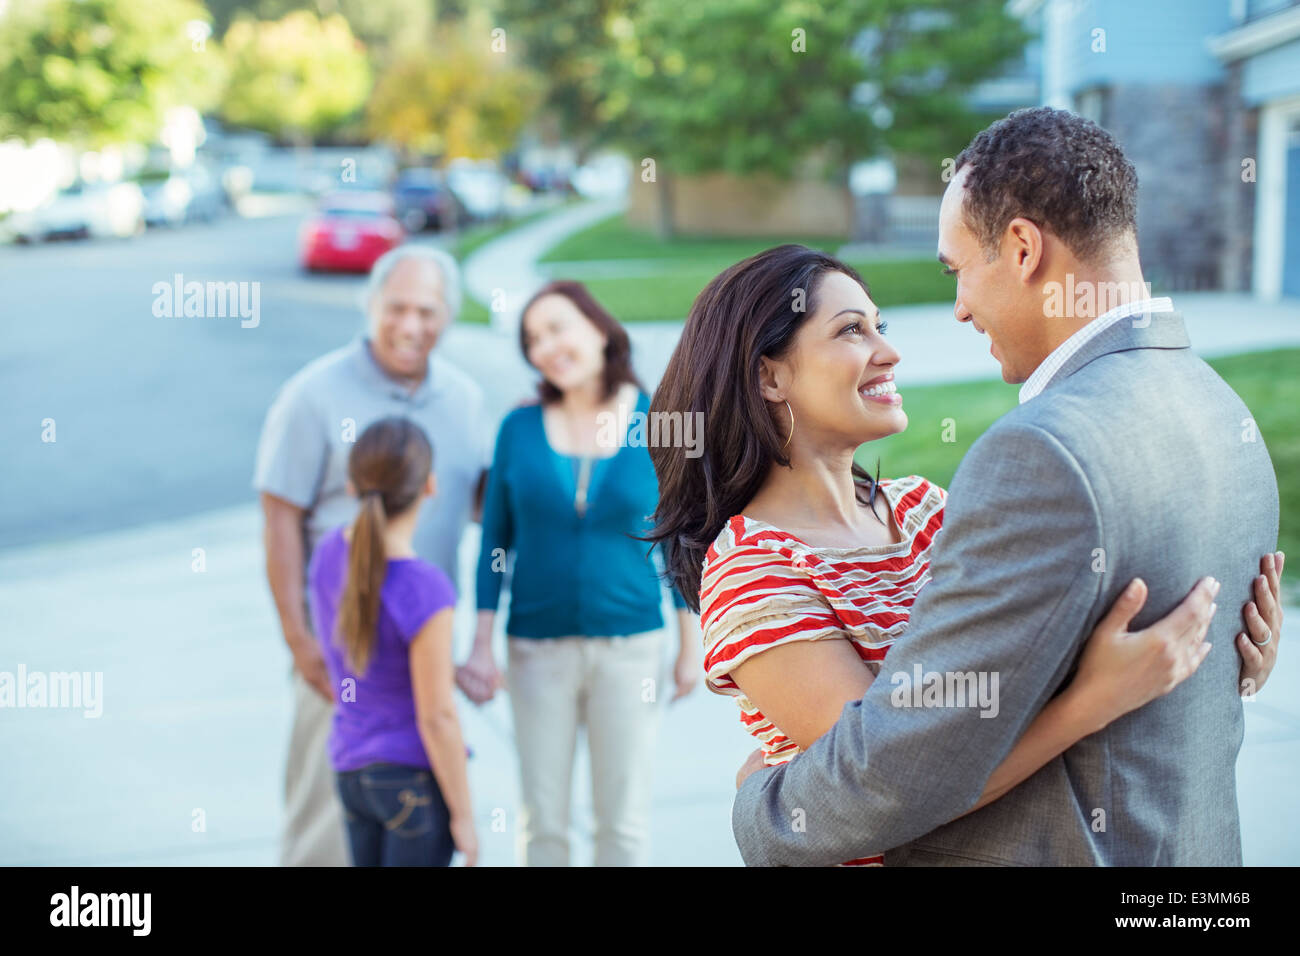 Couple hugging in driveway Banque D'Images